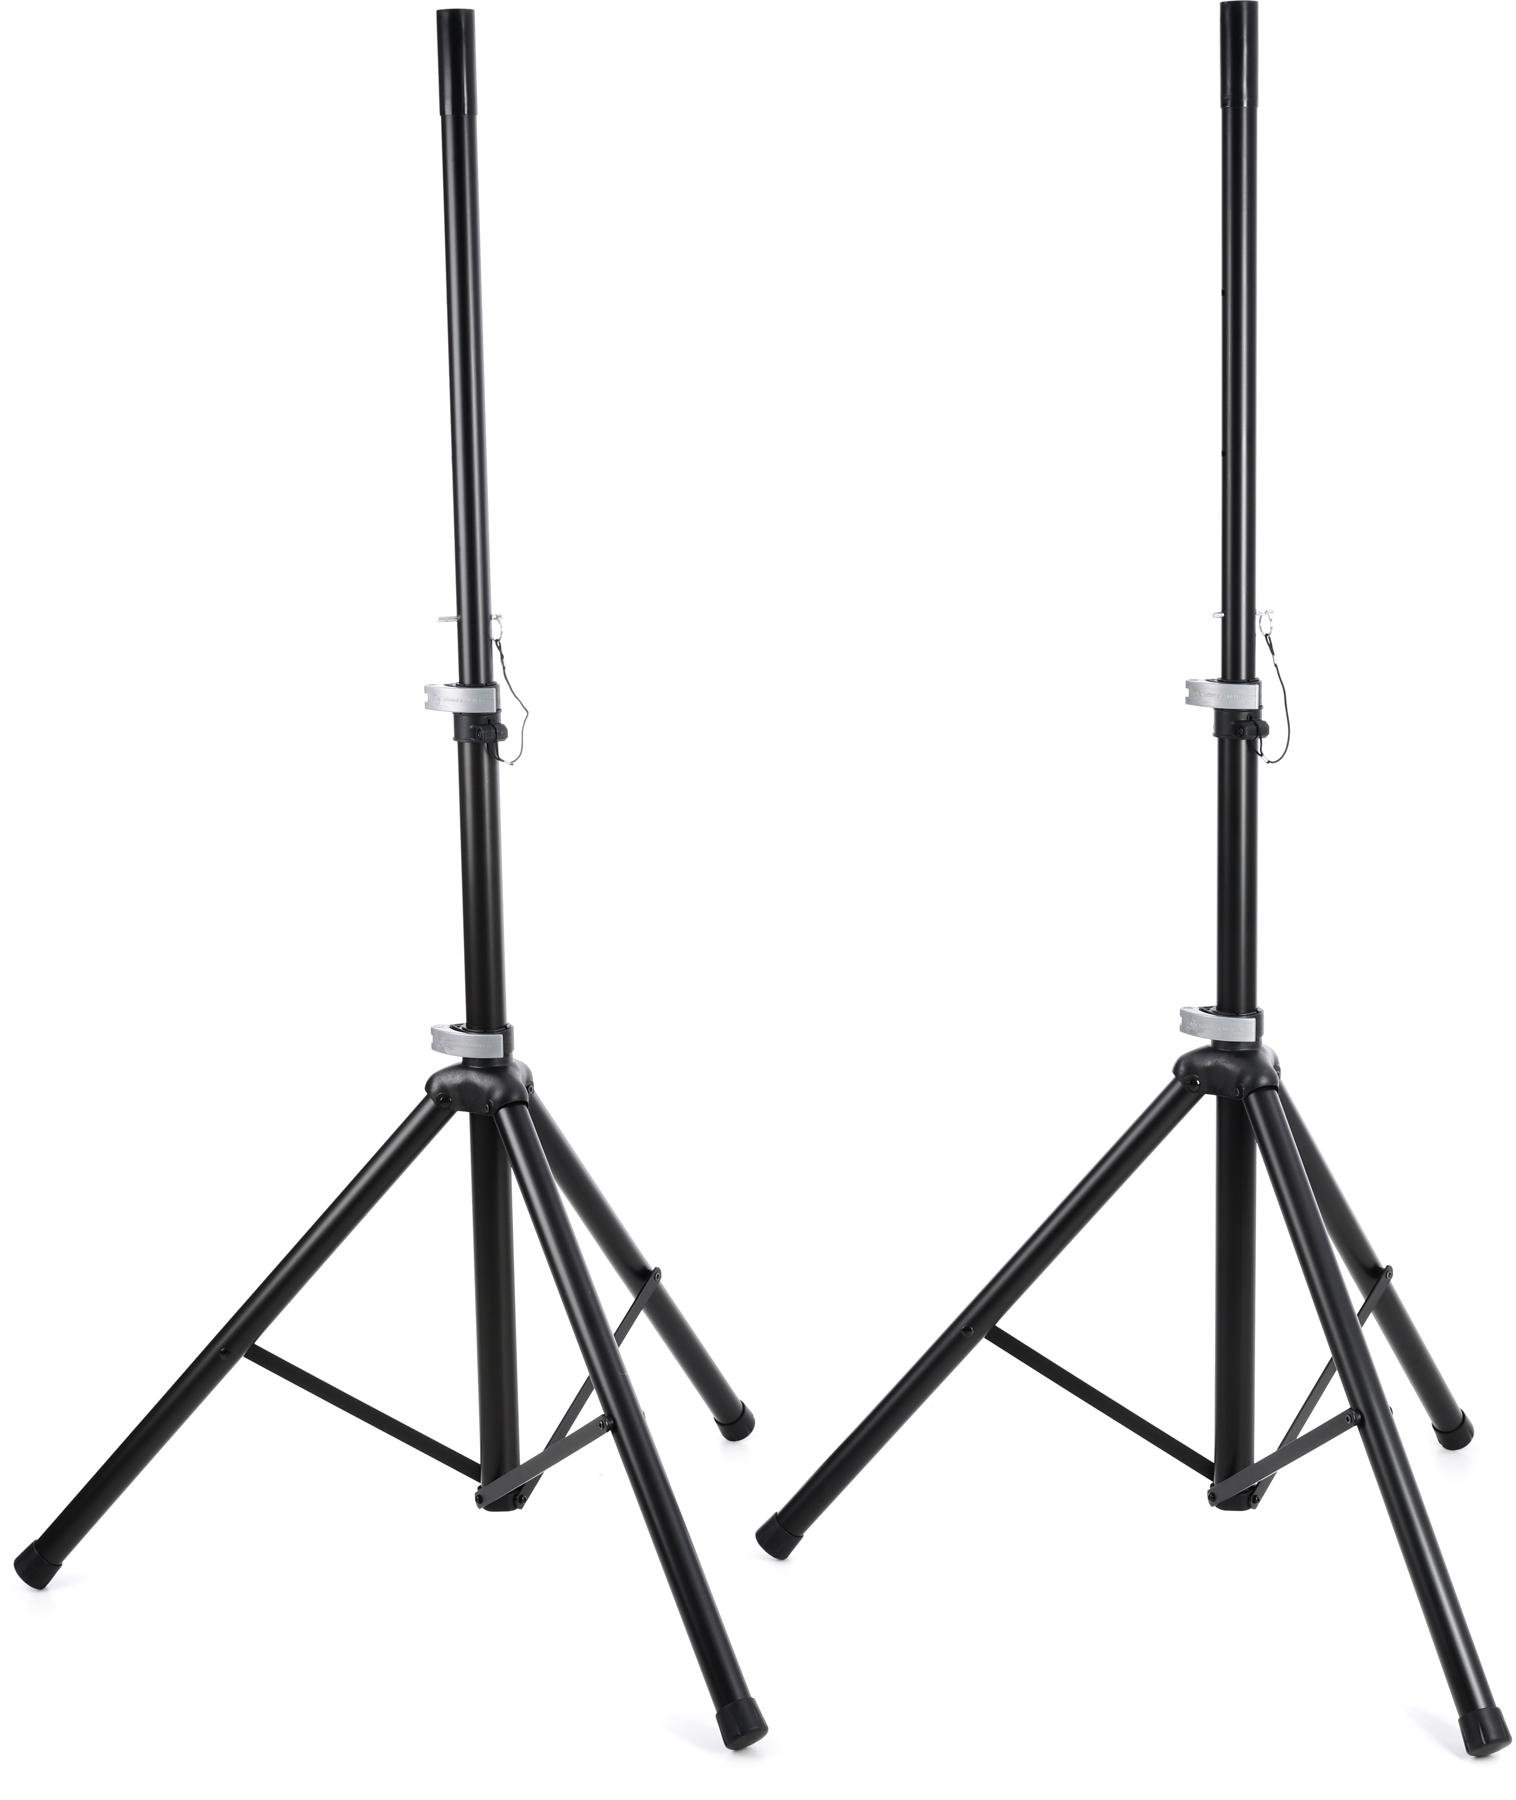 K&M 21459 Aluminum Speaker Stand (pair) with Bag - Black | Sweetwater